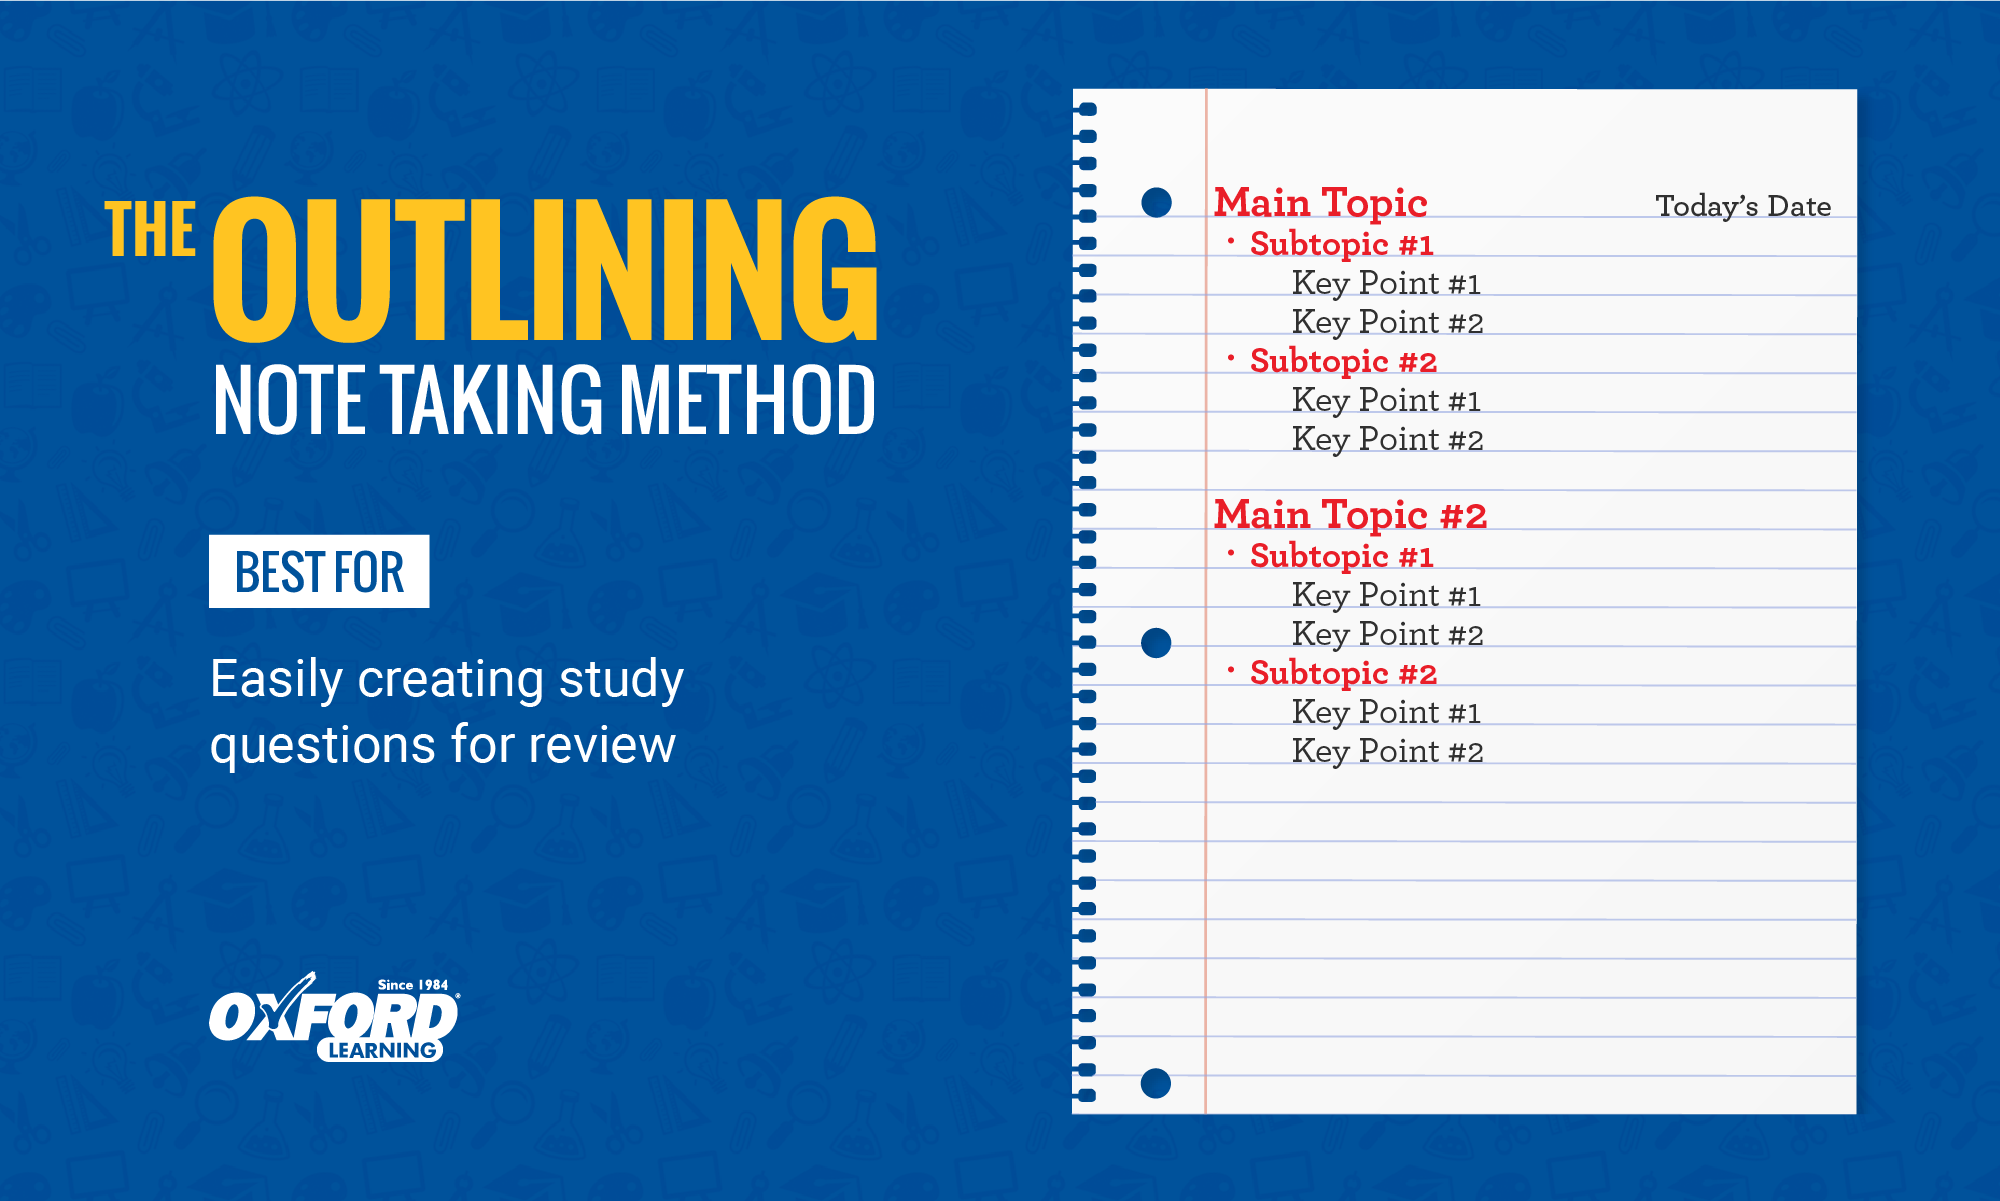 Example page set up for the Outlining note taking method